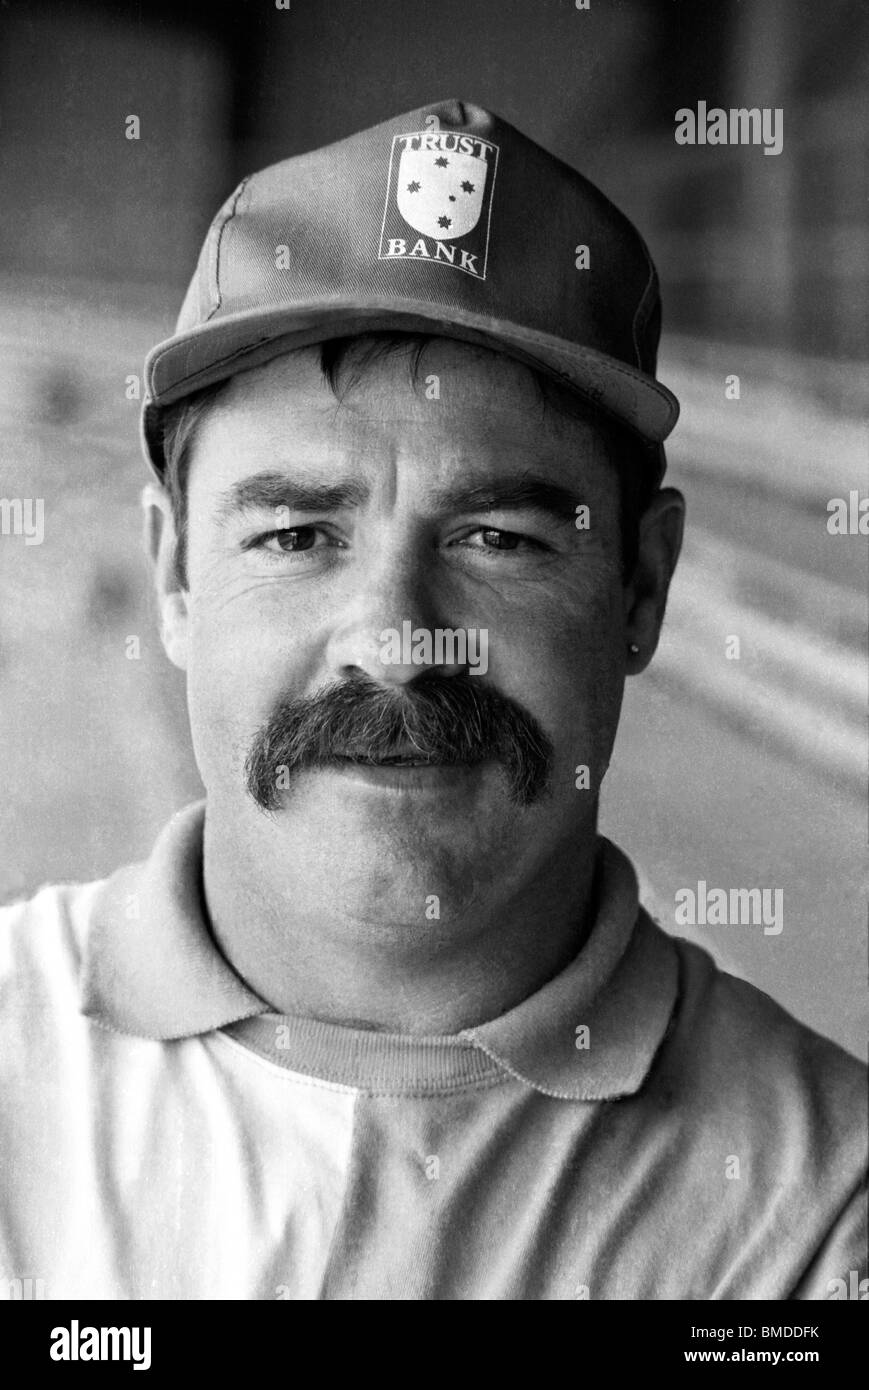 Australian test cricketer and legendary beer drinker, David Boon photographed at Bellerive Oval in Tasmania Stock Photo